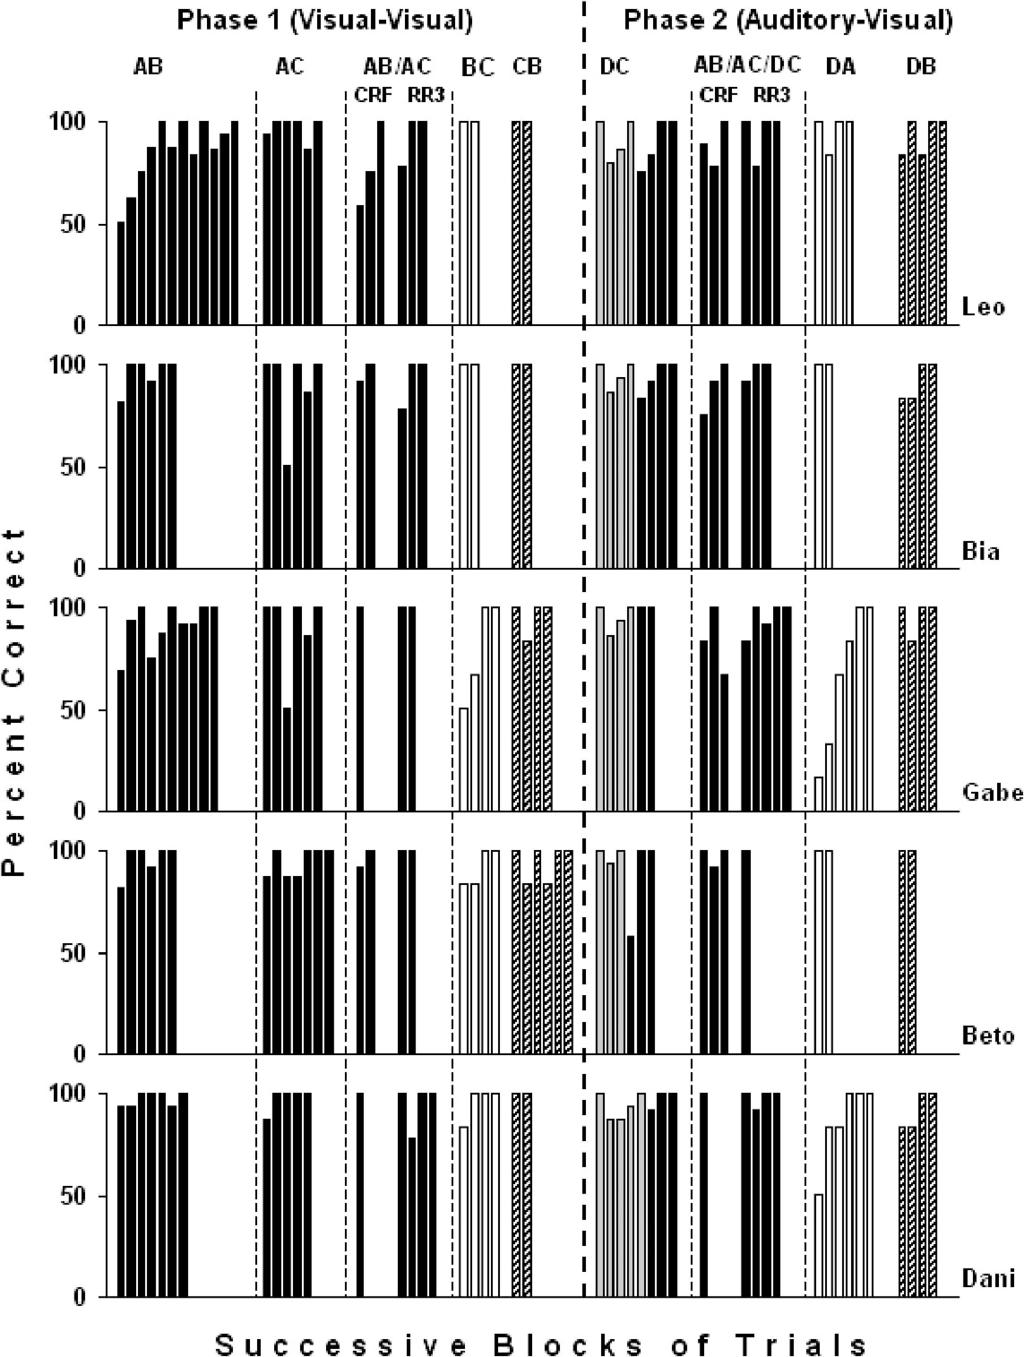 420 ANA CLAUDIA ALMEIDA-VERDU et al. Fig. 5. Percent correct responses across successive blocks of matching-to-sample teaching and test trials in Experiment 4 for 5 of the 6 participants.